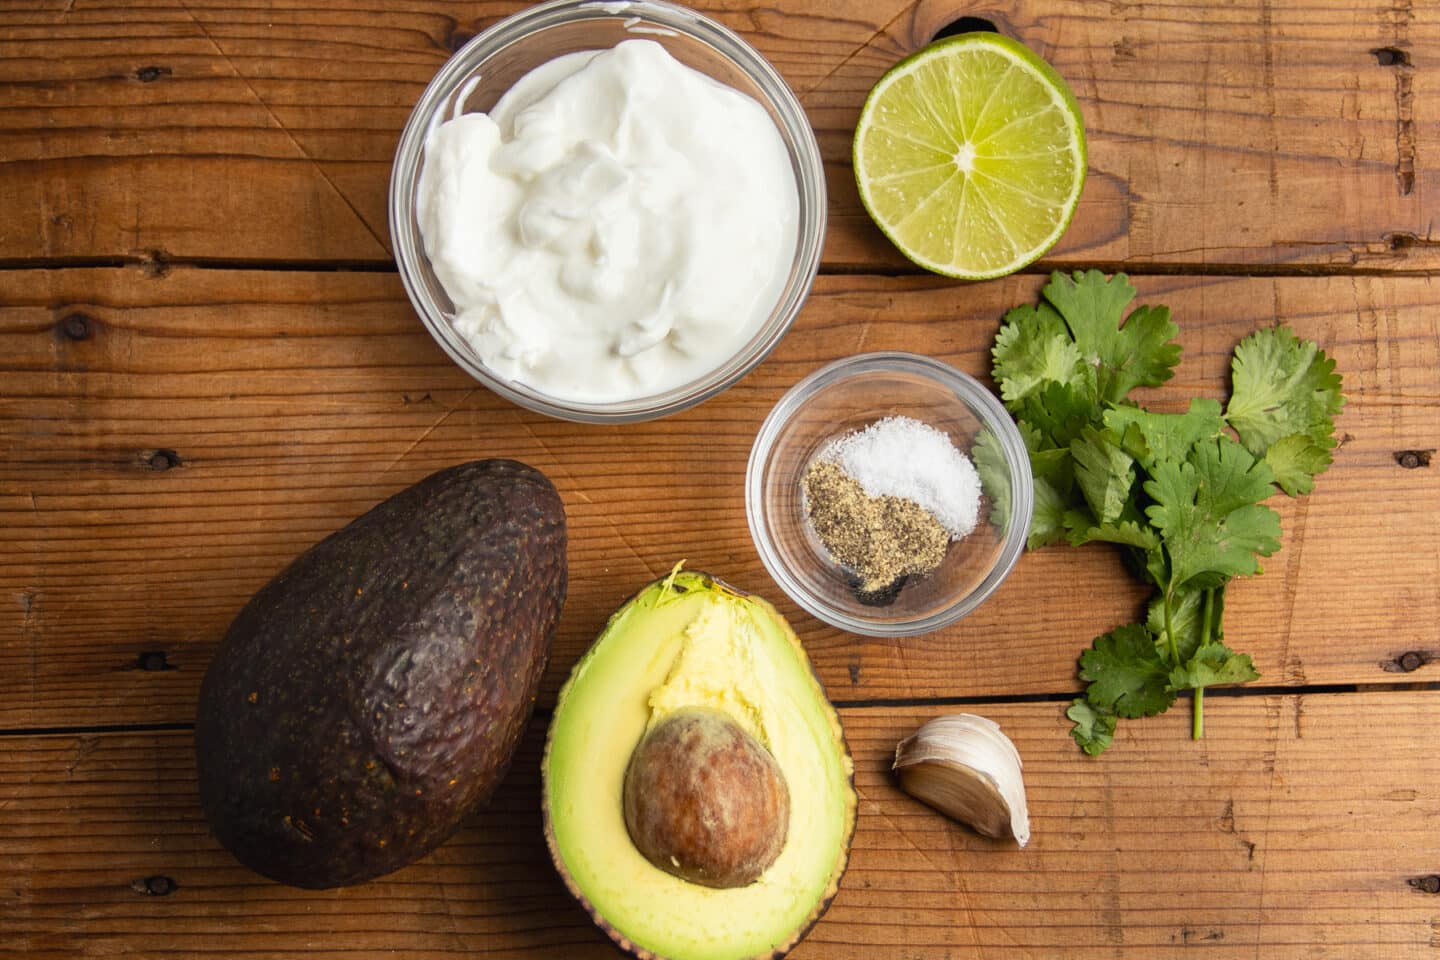 This is a picture of the ingredients needed to make the avocado crema.